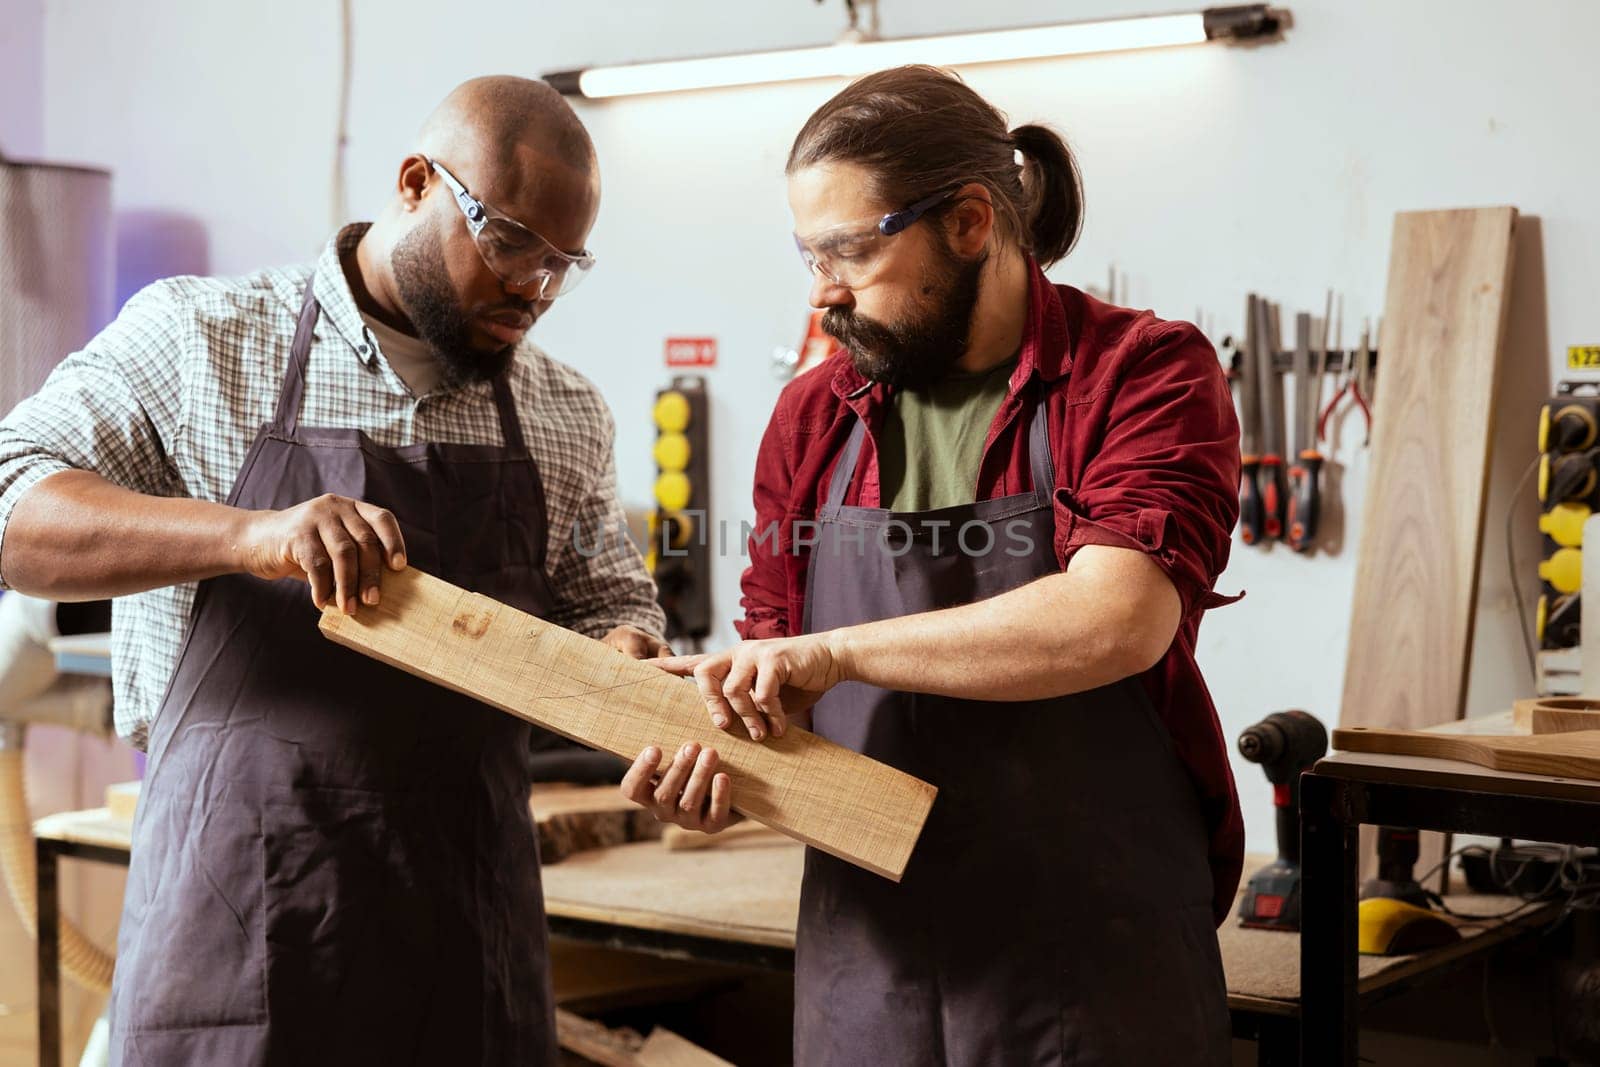 Manufacturer and apprentice wearing safety glasses selecting high quality wood materials. Cabinetmaker and colleague using protective equipment doing quality assurance on lumber piece